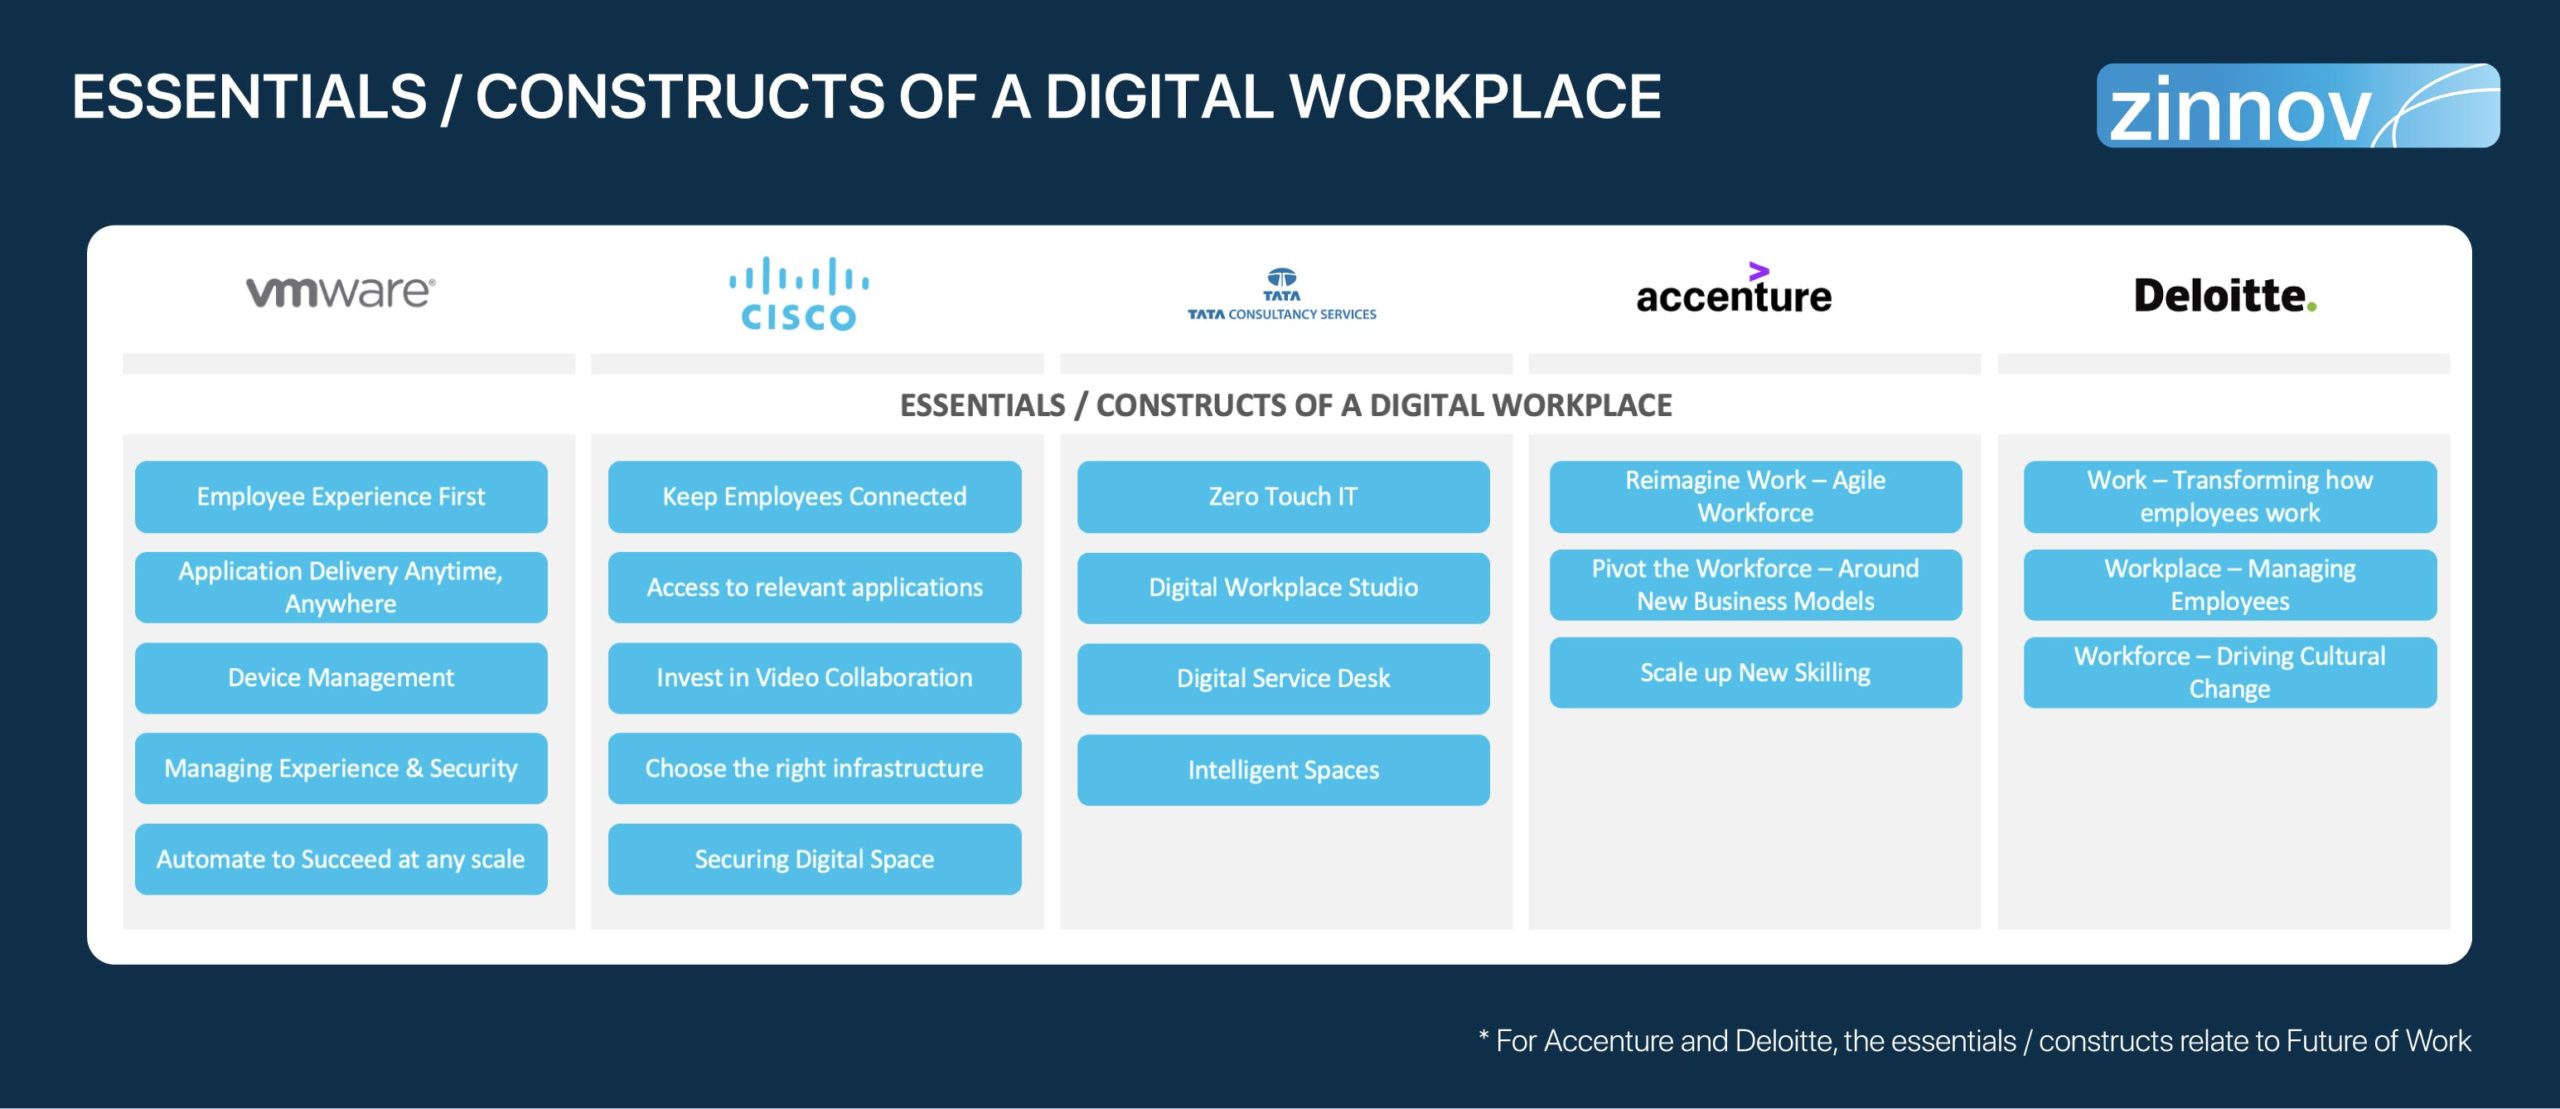 Essentials / Constructs of a digital workplace